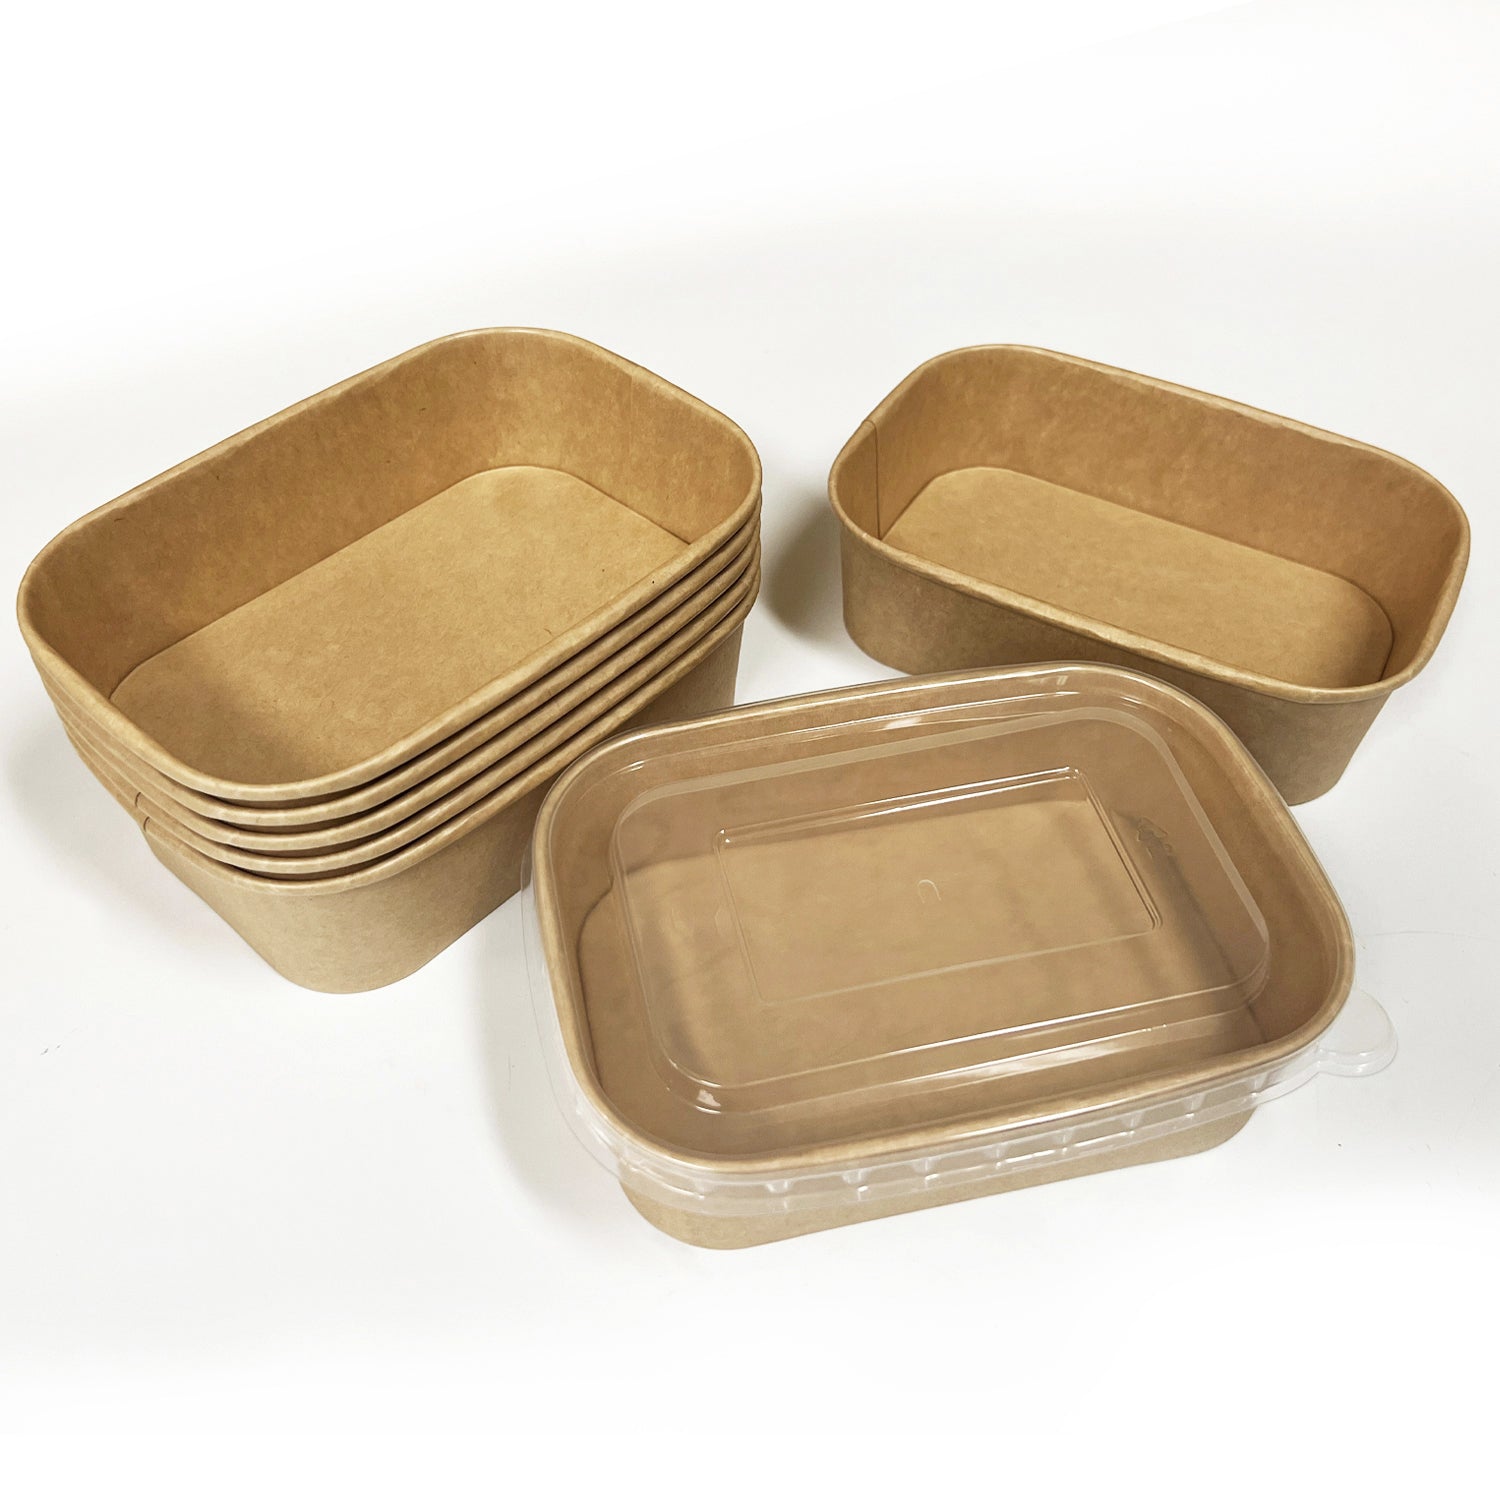 50 Sets/300 Sets, 22oz, 650ml, Kraft Paper Rectangle Containers, with PP Lids